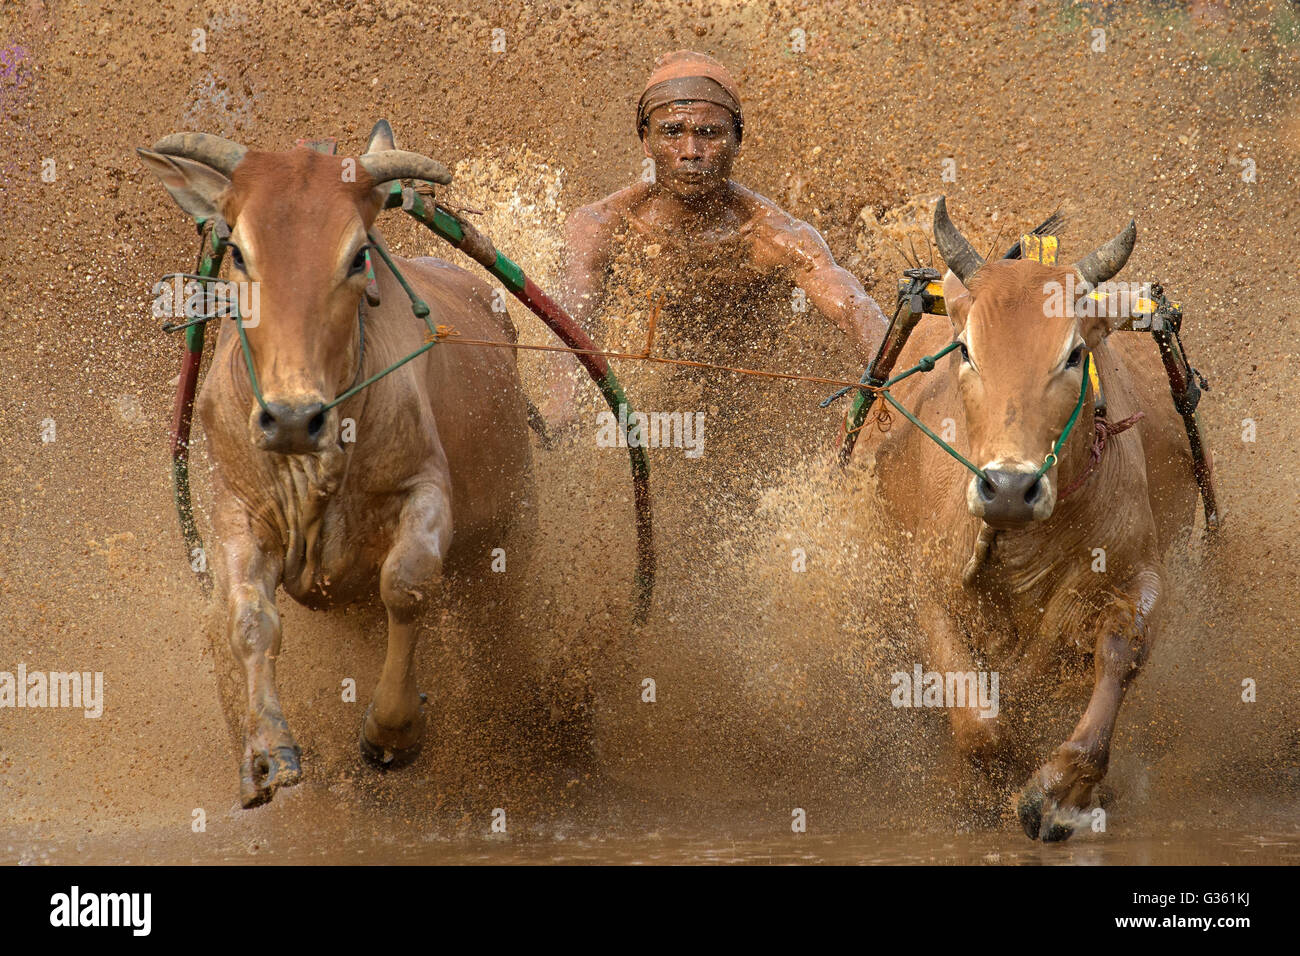 A jockey controls his cow during the Pacu Jawi (Cow Race) in West Sumatra, Indonesia. Stock Photo